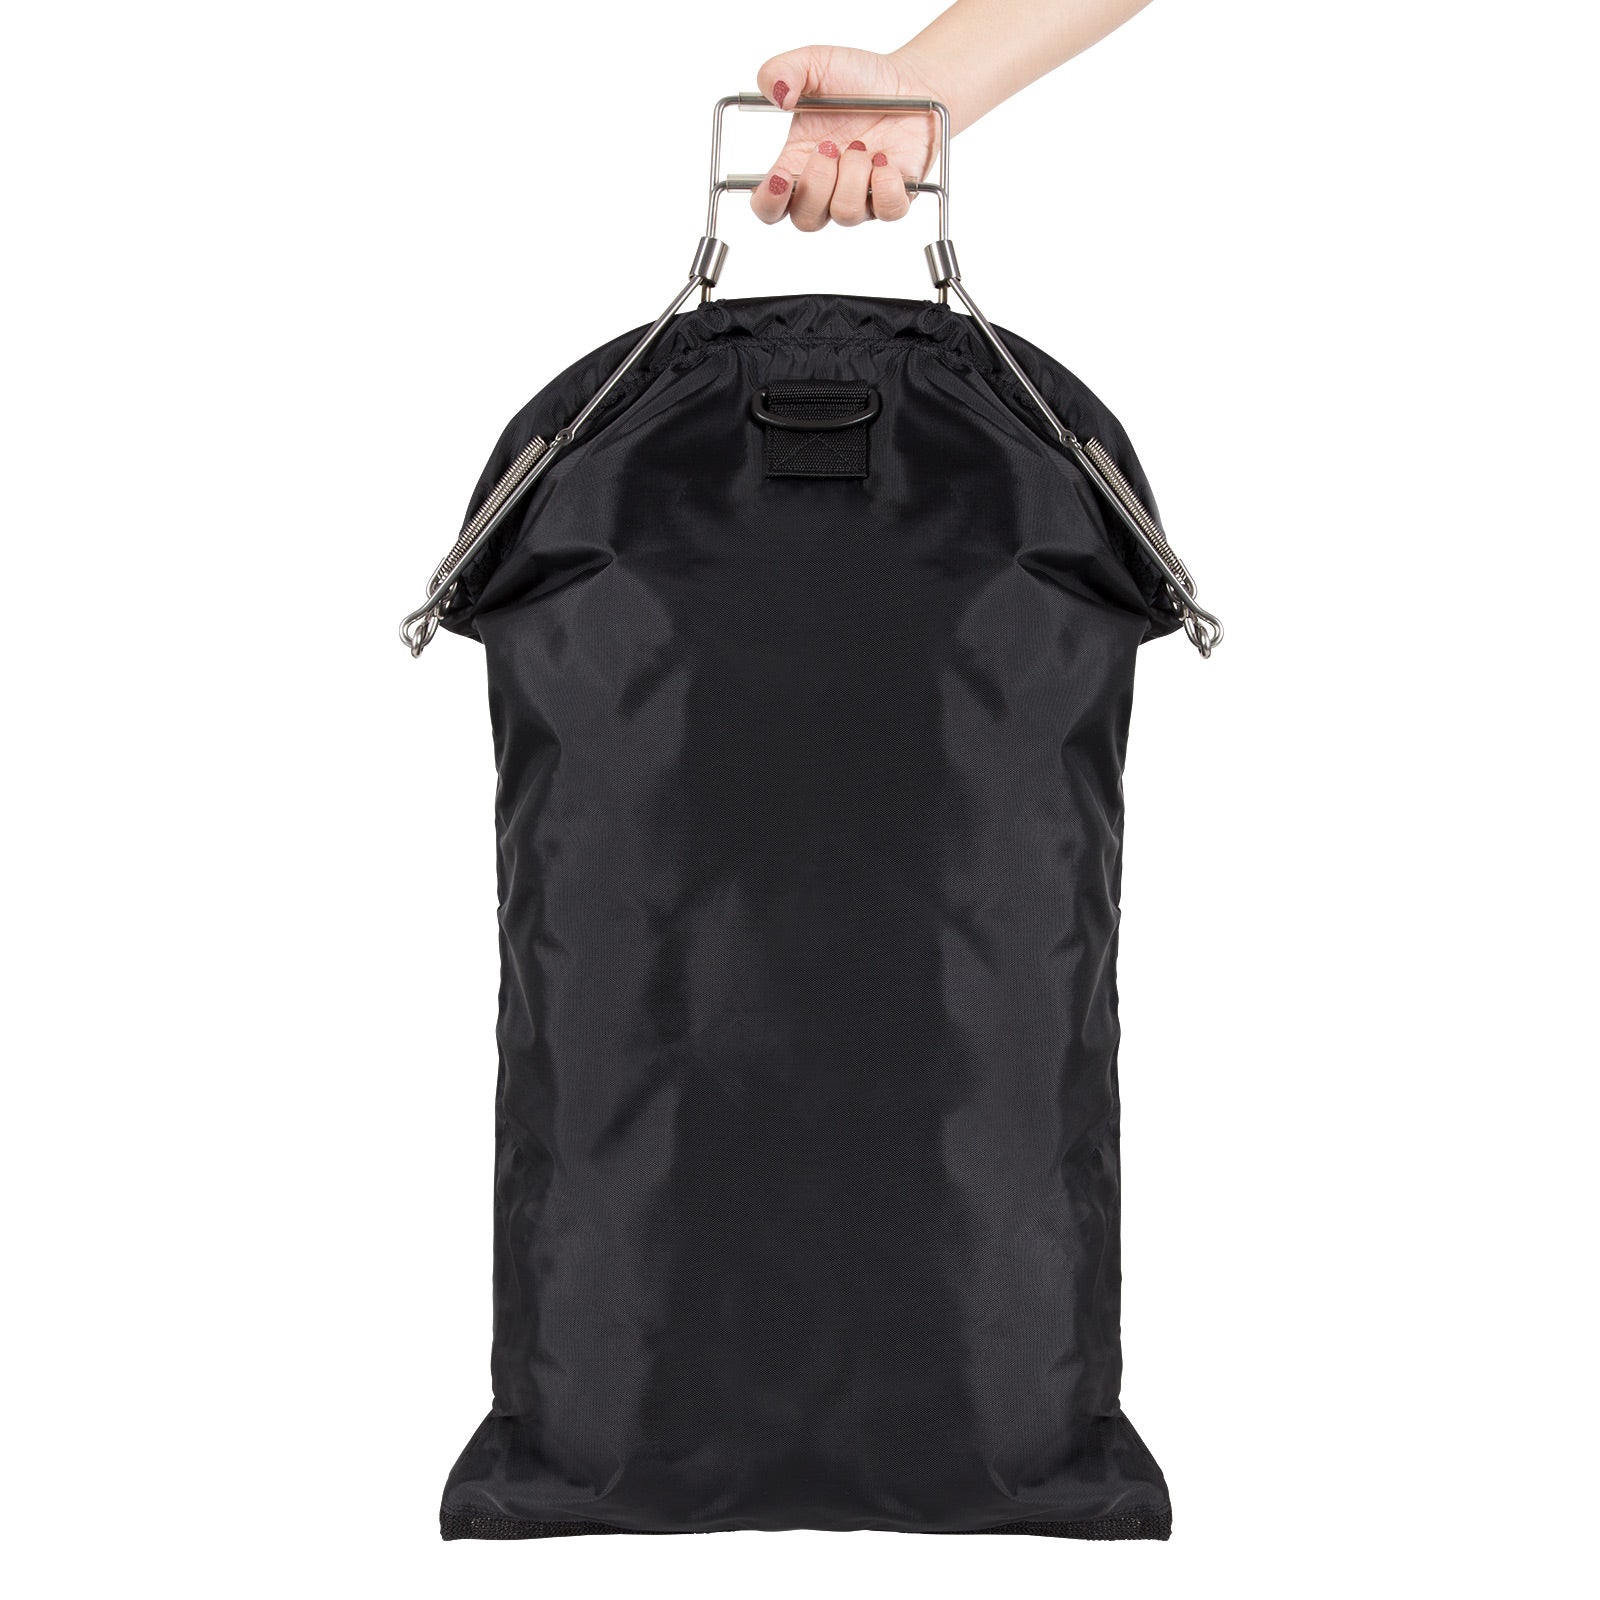 One Hand Release Game Bag